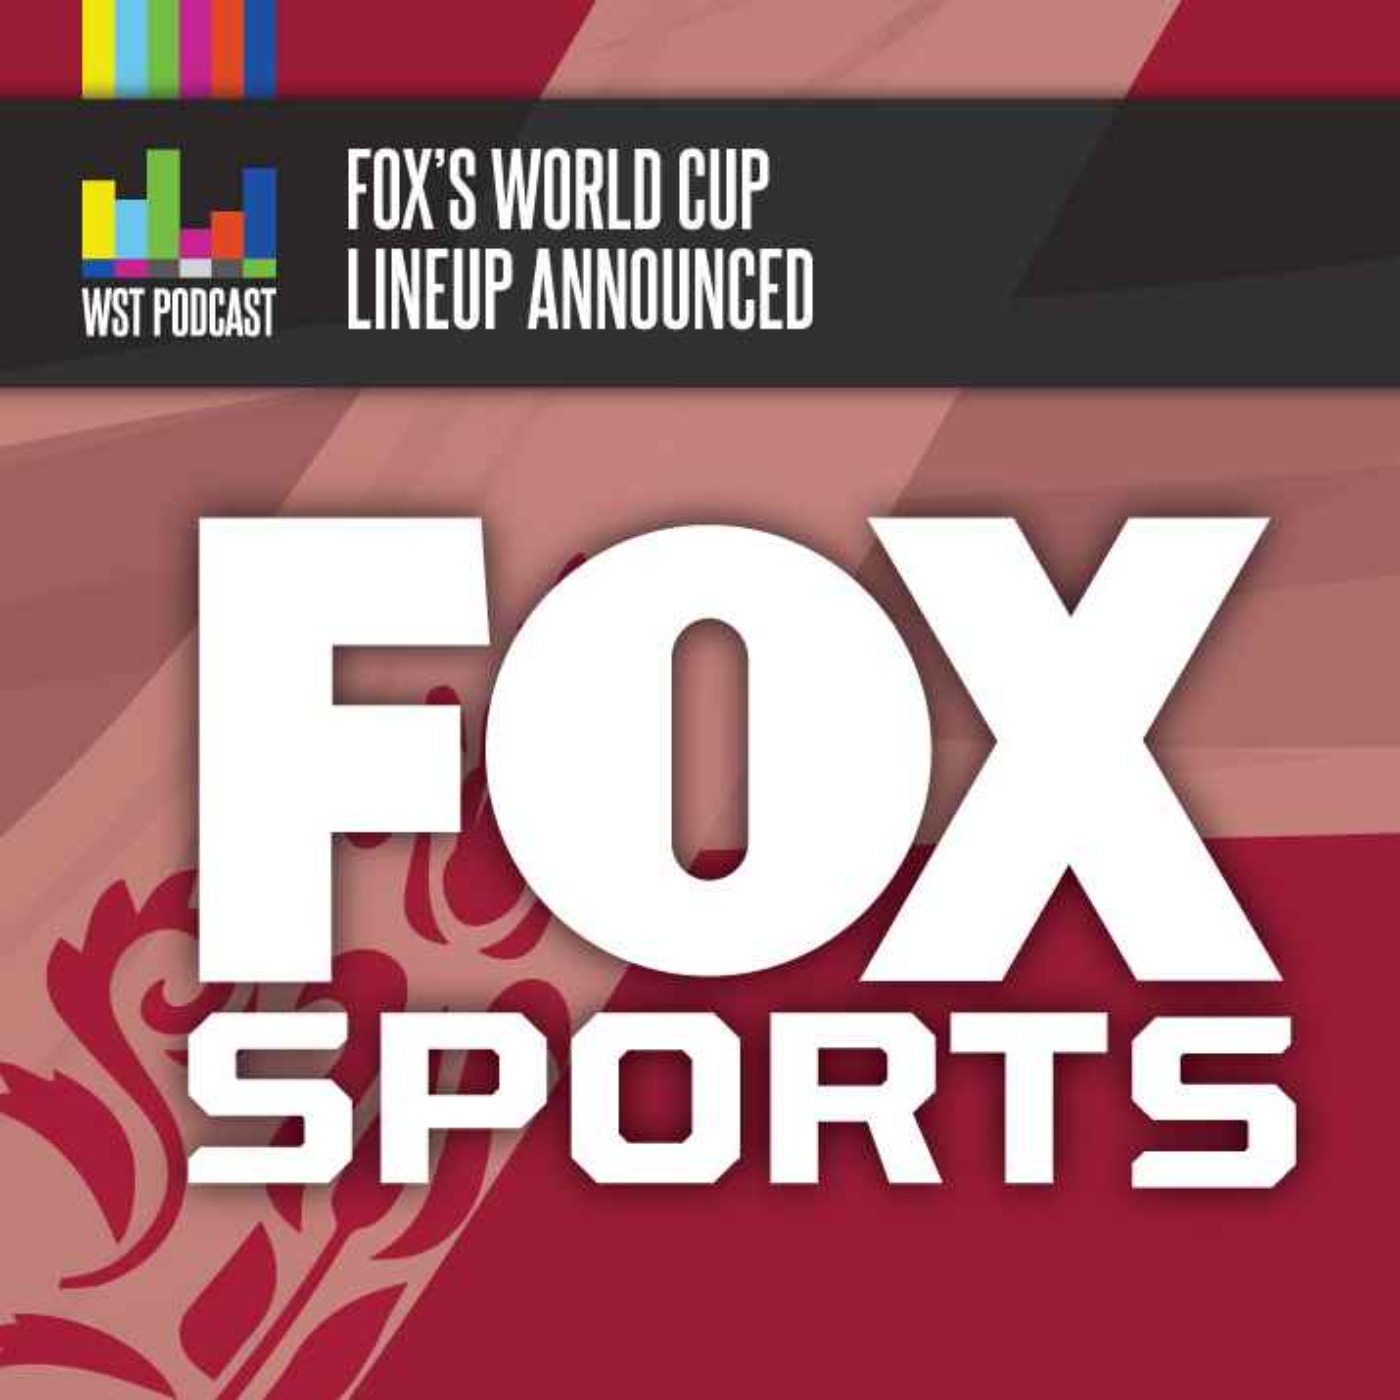 What to make of FOX's World Cup lineup